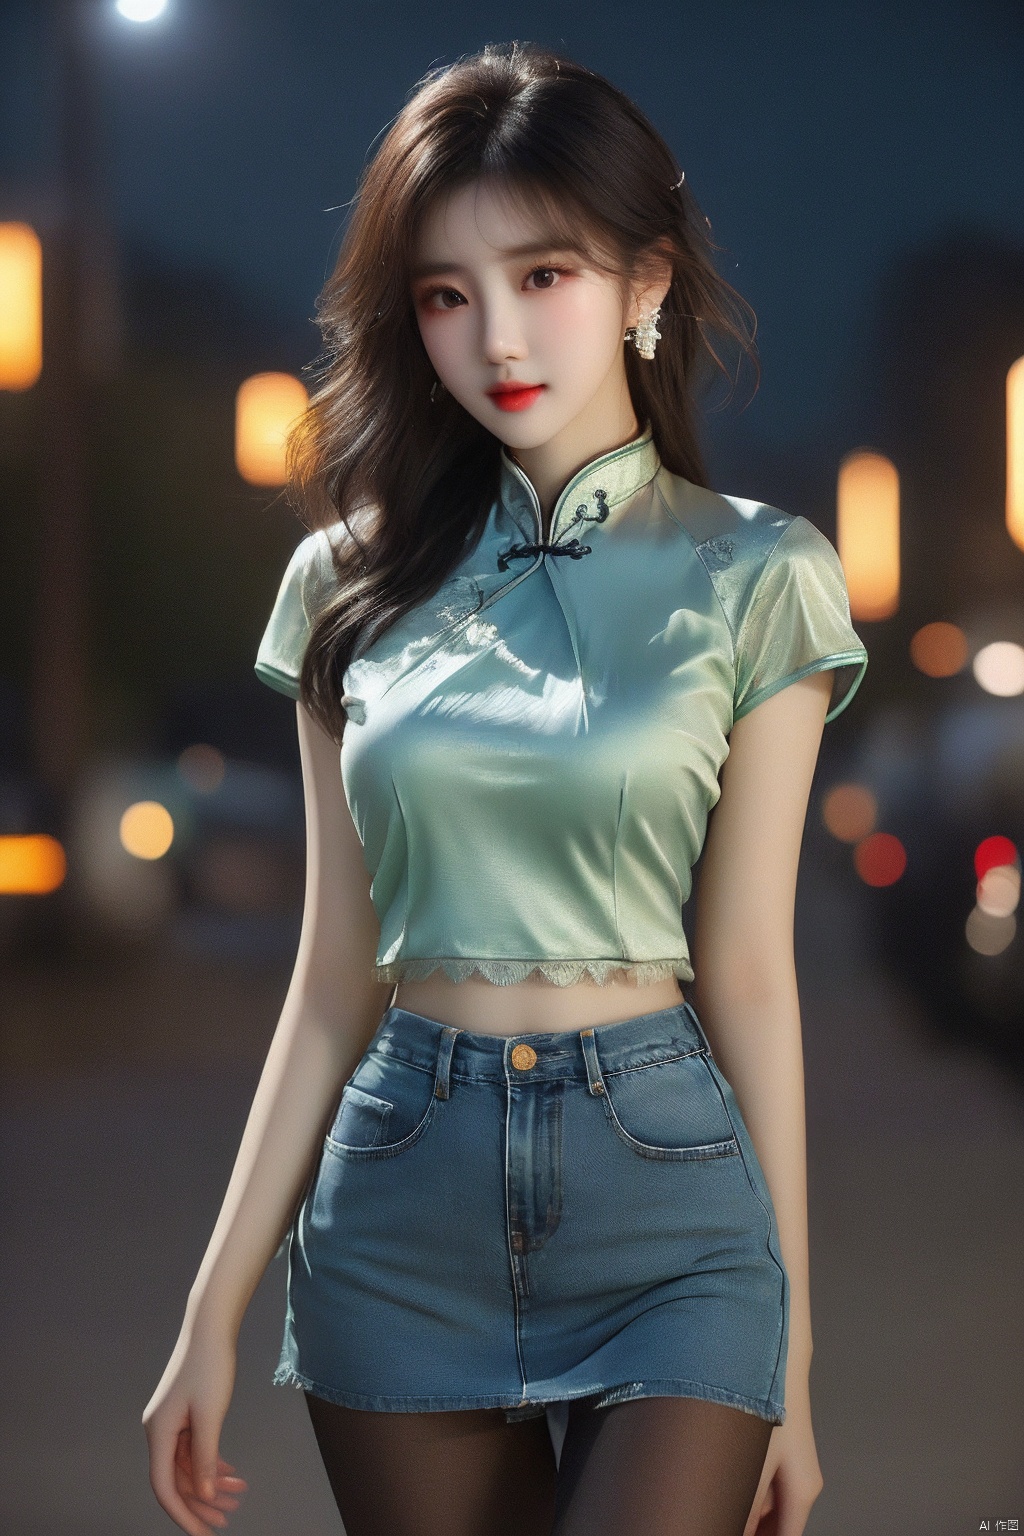 ((best quality, 8k, masterpiece: 1.3)), focus: 1.2, Wearing a emerald red cheongsam,8k ultra highdefinition,masterpiece级别的作品,RAW format photos,best picture quality,extreme details（1.2）：Realistic reproduction,8K resolution unifies extremely detailed CG,8K diamond level exquisiteness,Wallpaper-like visual impact,Has deep depth of field、Layered light and shadow effects、Lens flash、Ray tracing technology（Amazingly beautiful face、beautiful lips、beautiful eyes）,The facial details are extremely delicate（Skin texture is extremely delicate）——Depicting Korean female models,in the dark night,in deep shadow,Charming Korean girl,Just like a K-pop idol（Extremely slim and tight figure：1.3）,Shown from the audience’s perspective,Exquisite waistline,navel-baring outfit,（cropped waist T-shirt:1.5）,（low rise denim mini skirt:1.5）,Short clothing tailoring design,city night view,neon lights,Beautiful Korean girl in dark night atmosphere,Wear pearl stud earrings、lace pantyhose,eyes clear and bright,Walking posture,Has fair skin,Look directly at the front of the camera,Big eyes full of charm（Upper body close-up）,A while,Back close-up,The overall image is extremely slim、Slim and elegant,Exquisite facial features,She looks a lot like actor Kim Hee Sun, (/qingning/), jiqing, mtianmei